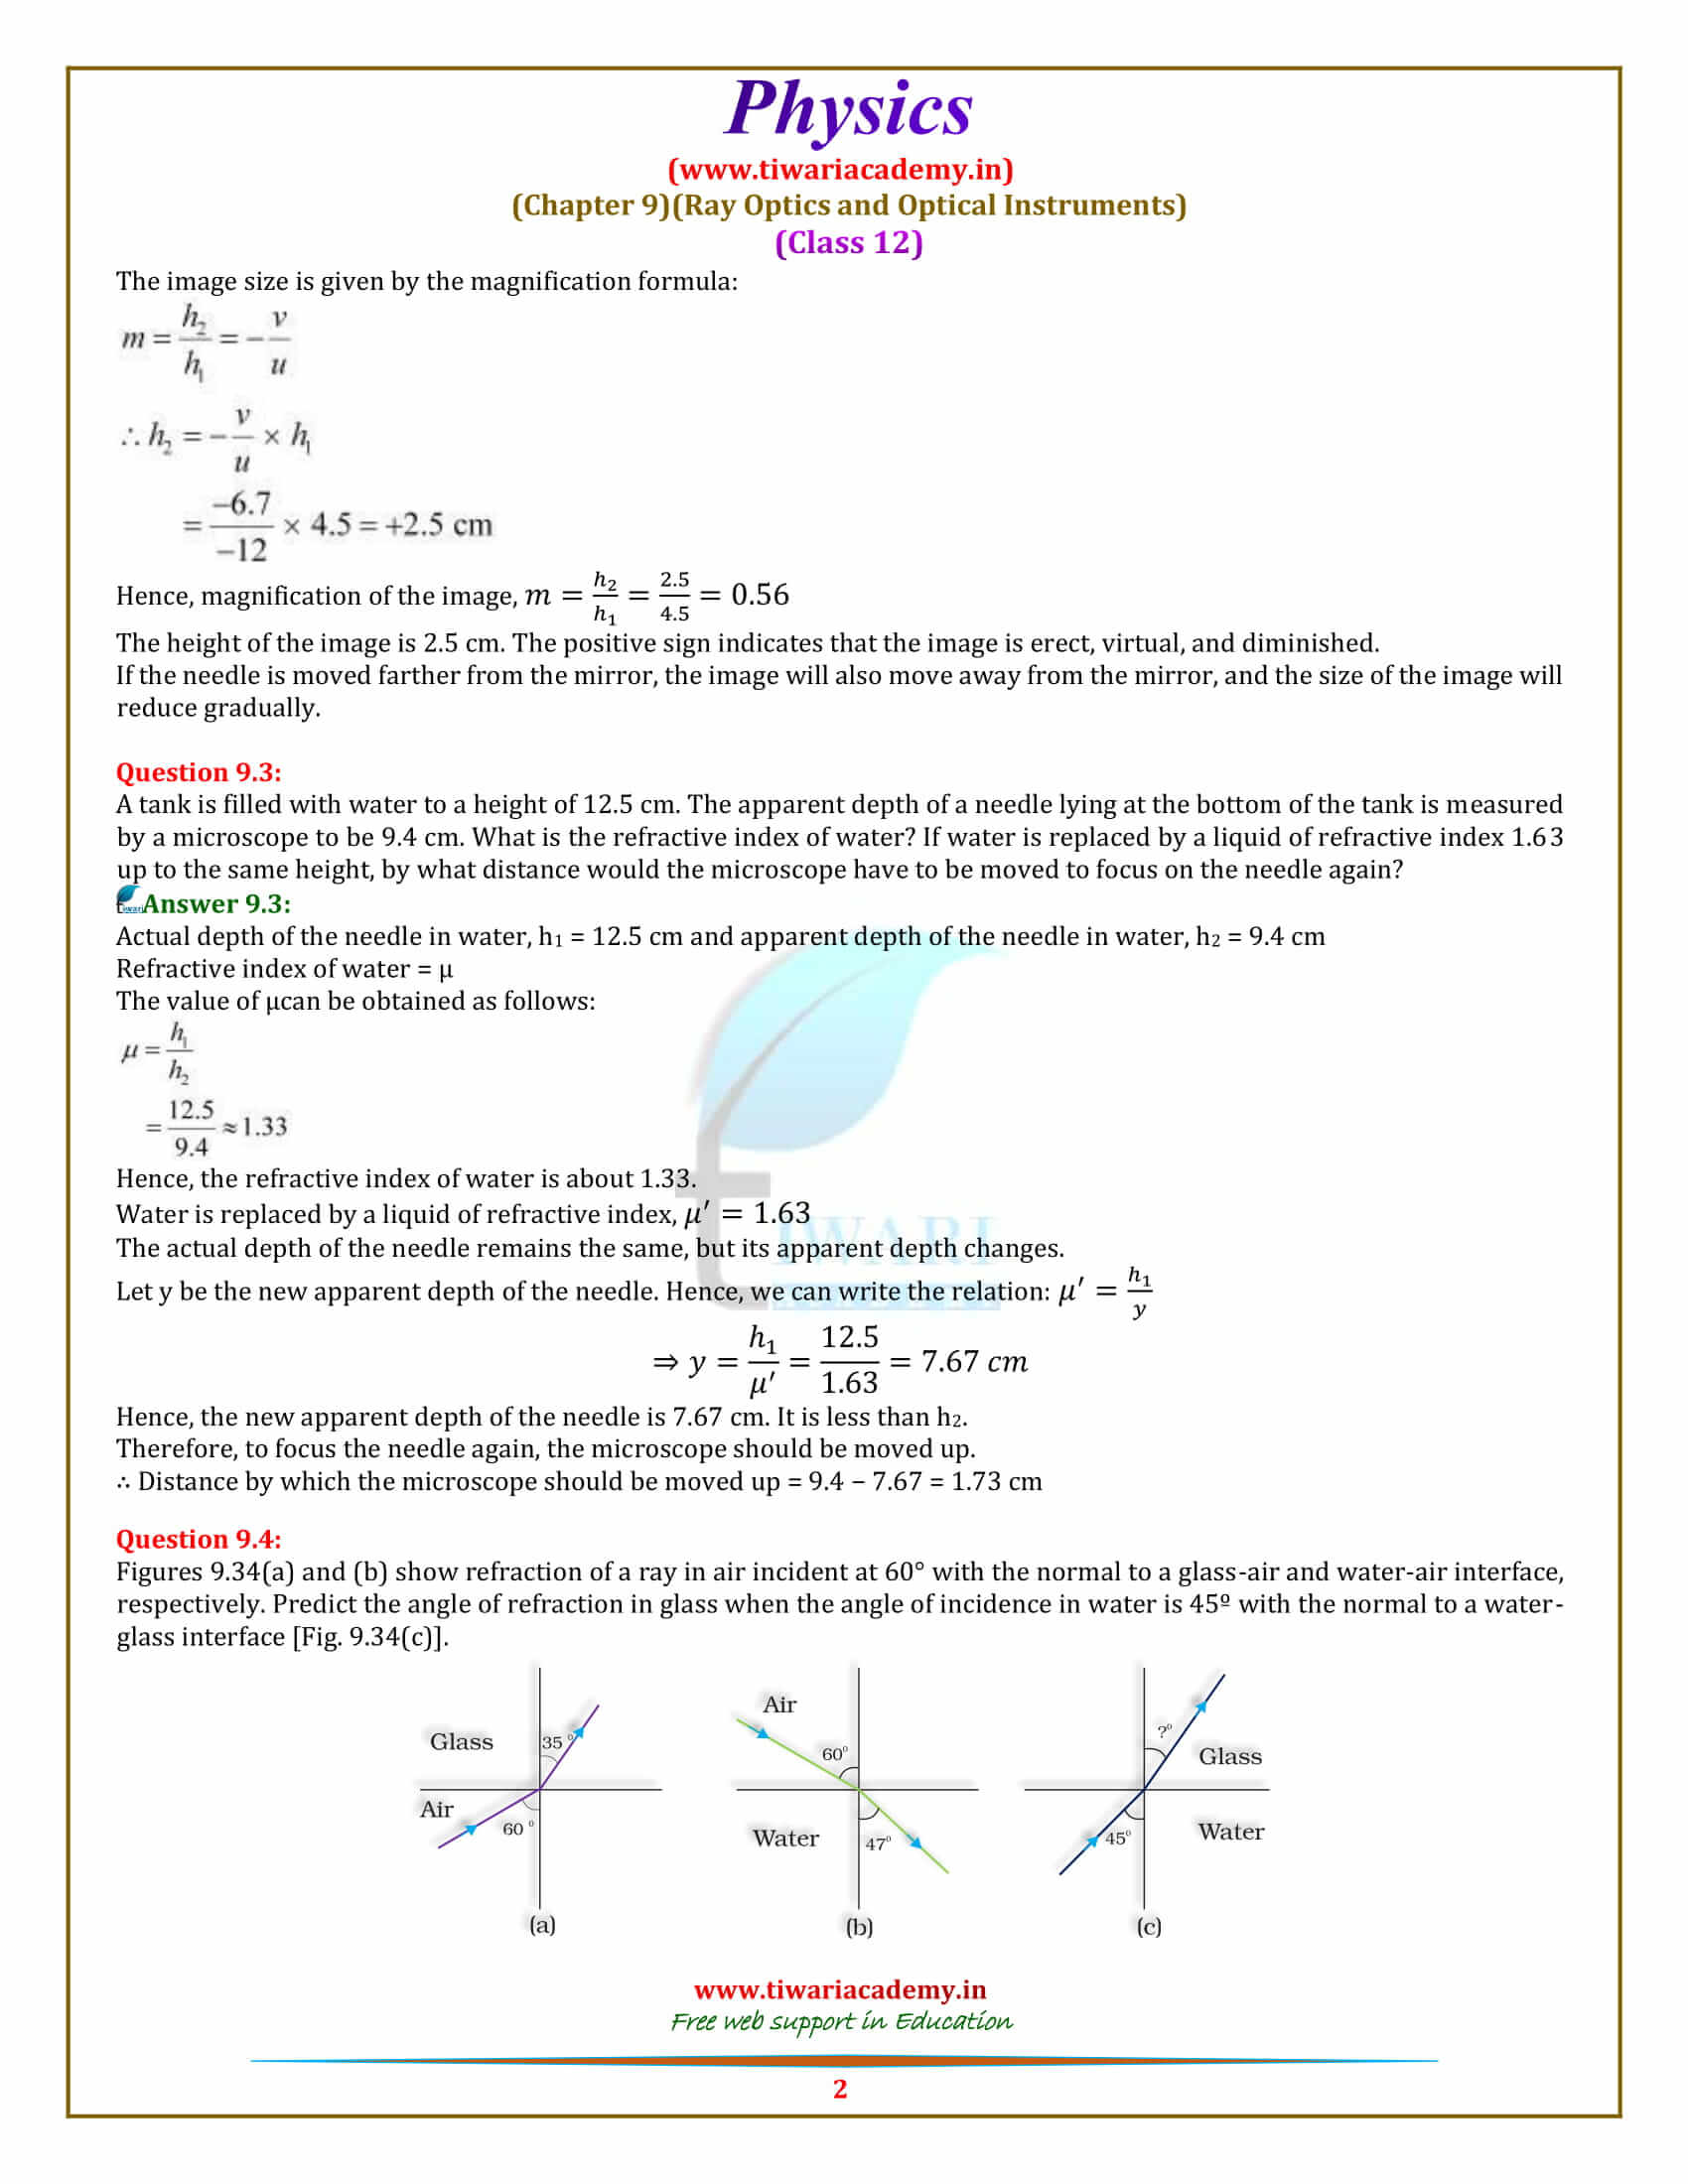 NCERT Solutions for Class 12 Physics Chapter 9 Ray Optics and Optical Instruments in pdf